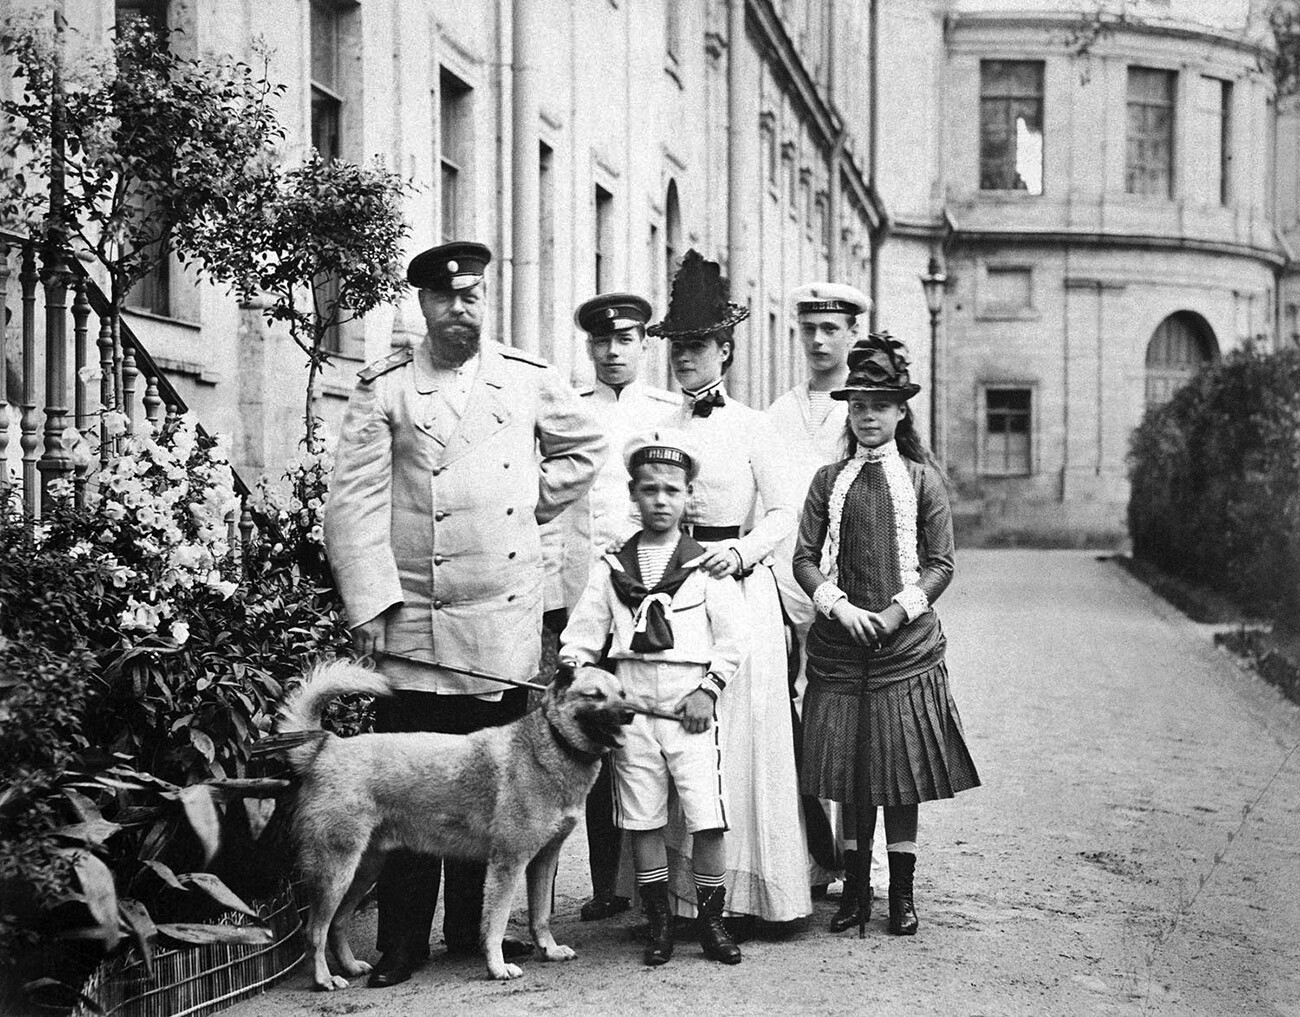 Emperor Alexander III, Tsarevitch Nicholas, Grand Duke Michael and dog, Empress Marie Feodorovna, Grand Duke George and Grand Duchess Xenia. Taken outside the Imperial palace at Gatchina